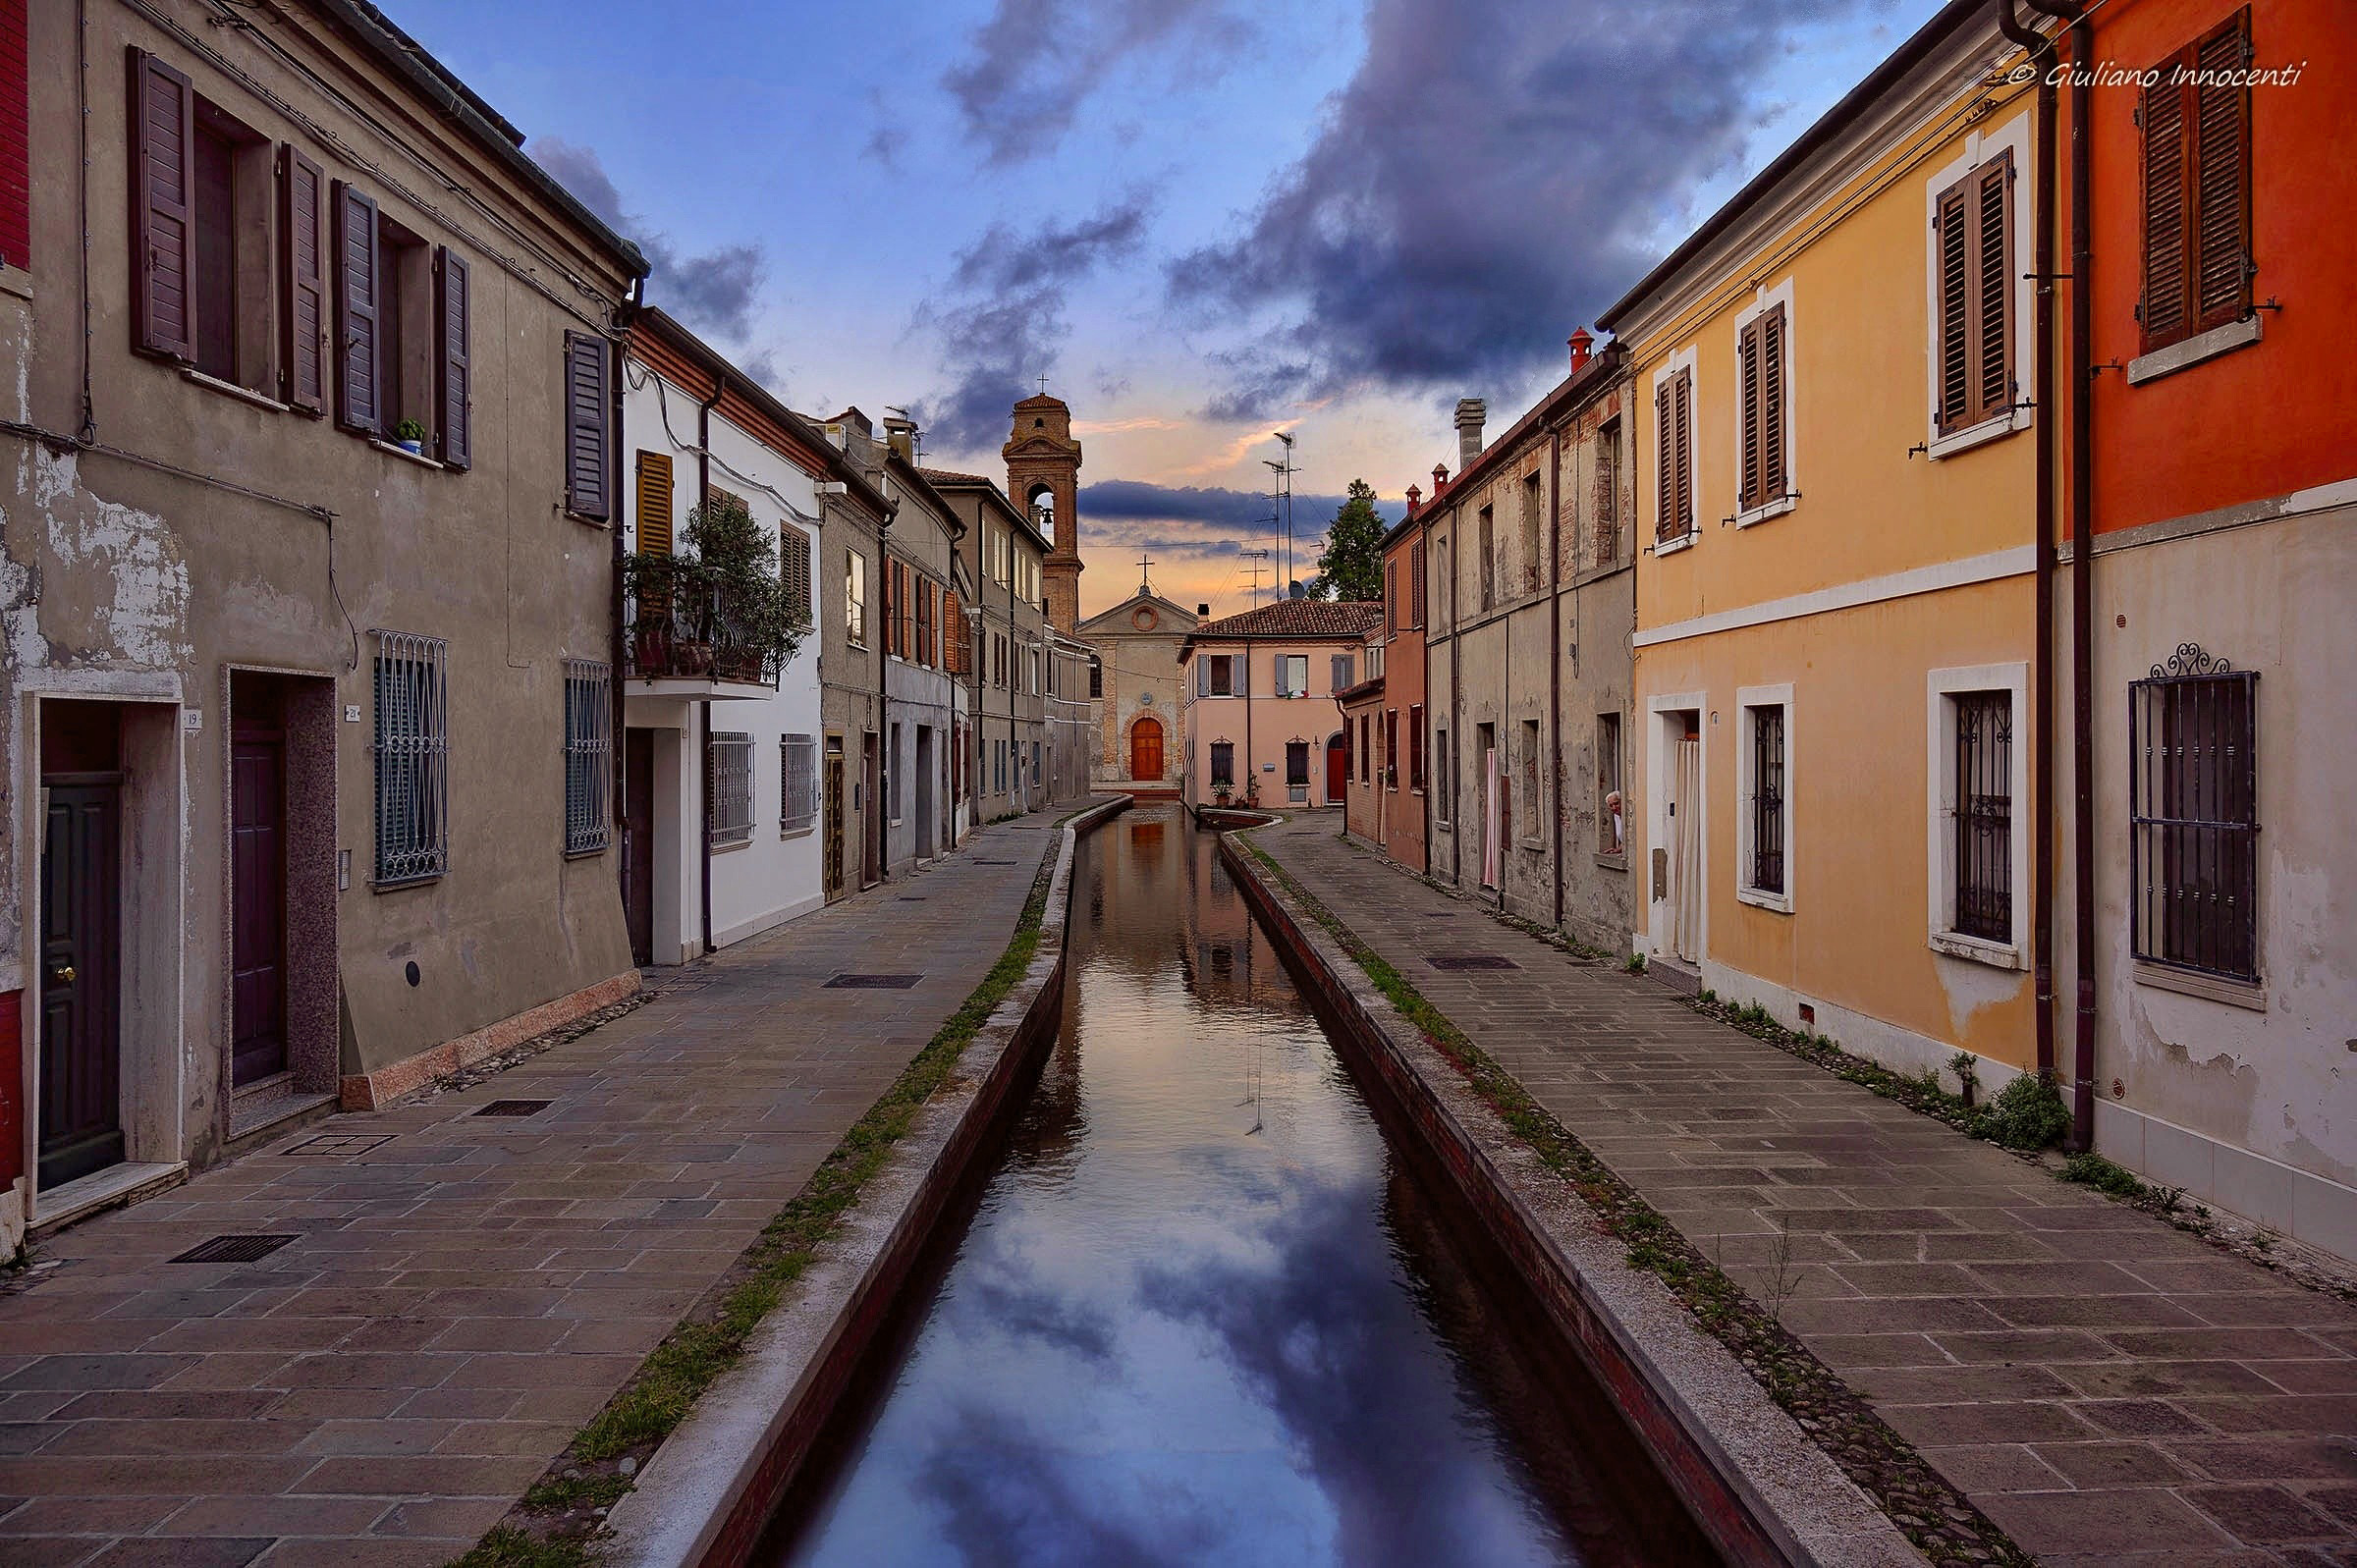 A look at Comacchio's canal...